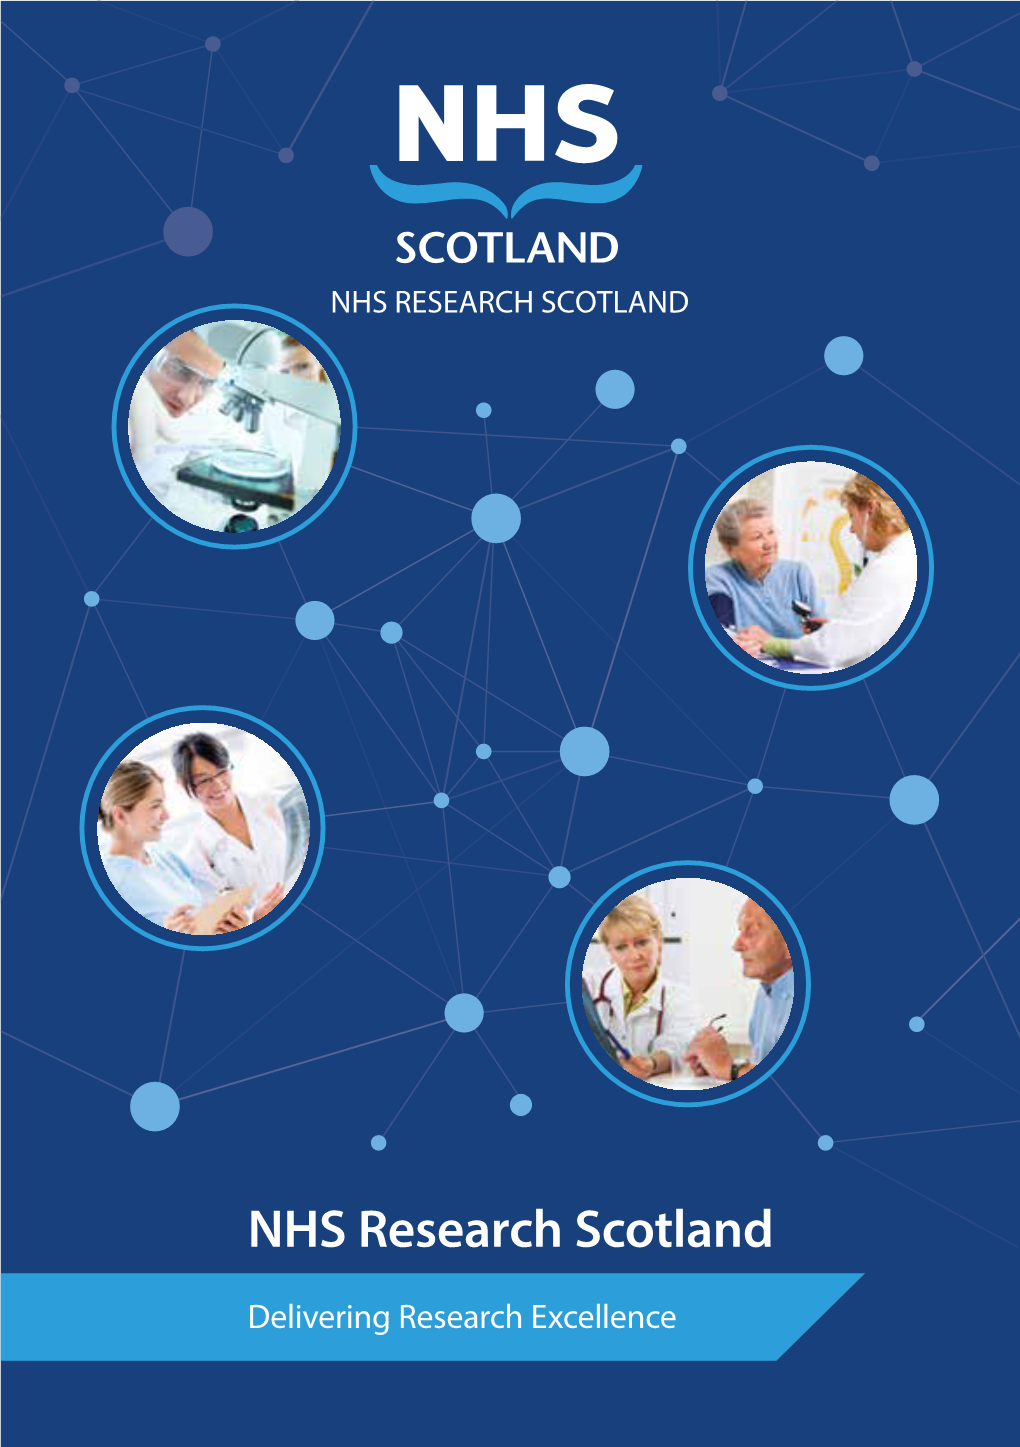 Contact NHS Research Scotland